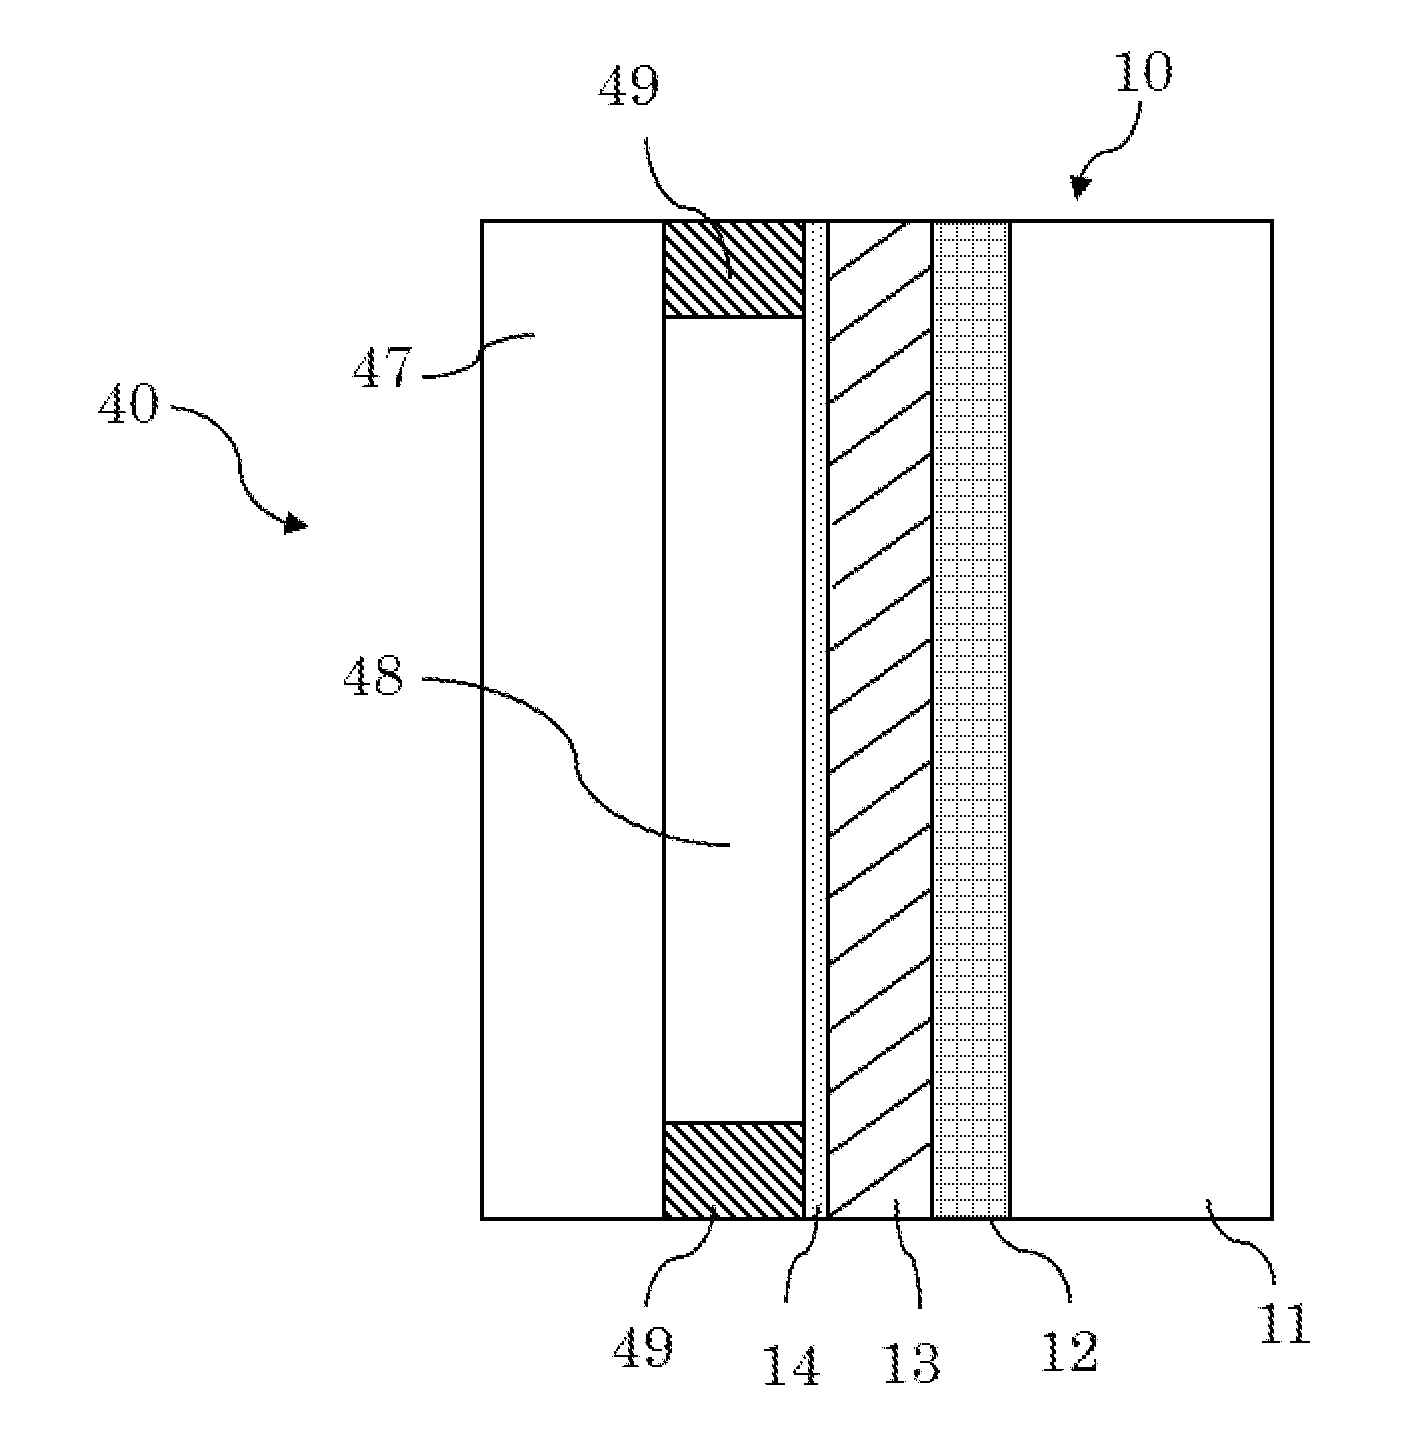 Solar control glass and solar control double glass having the solar control glass